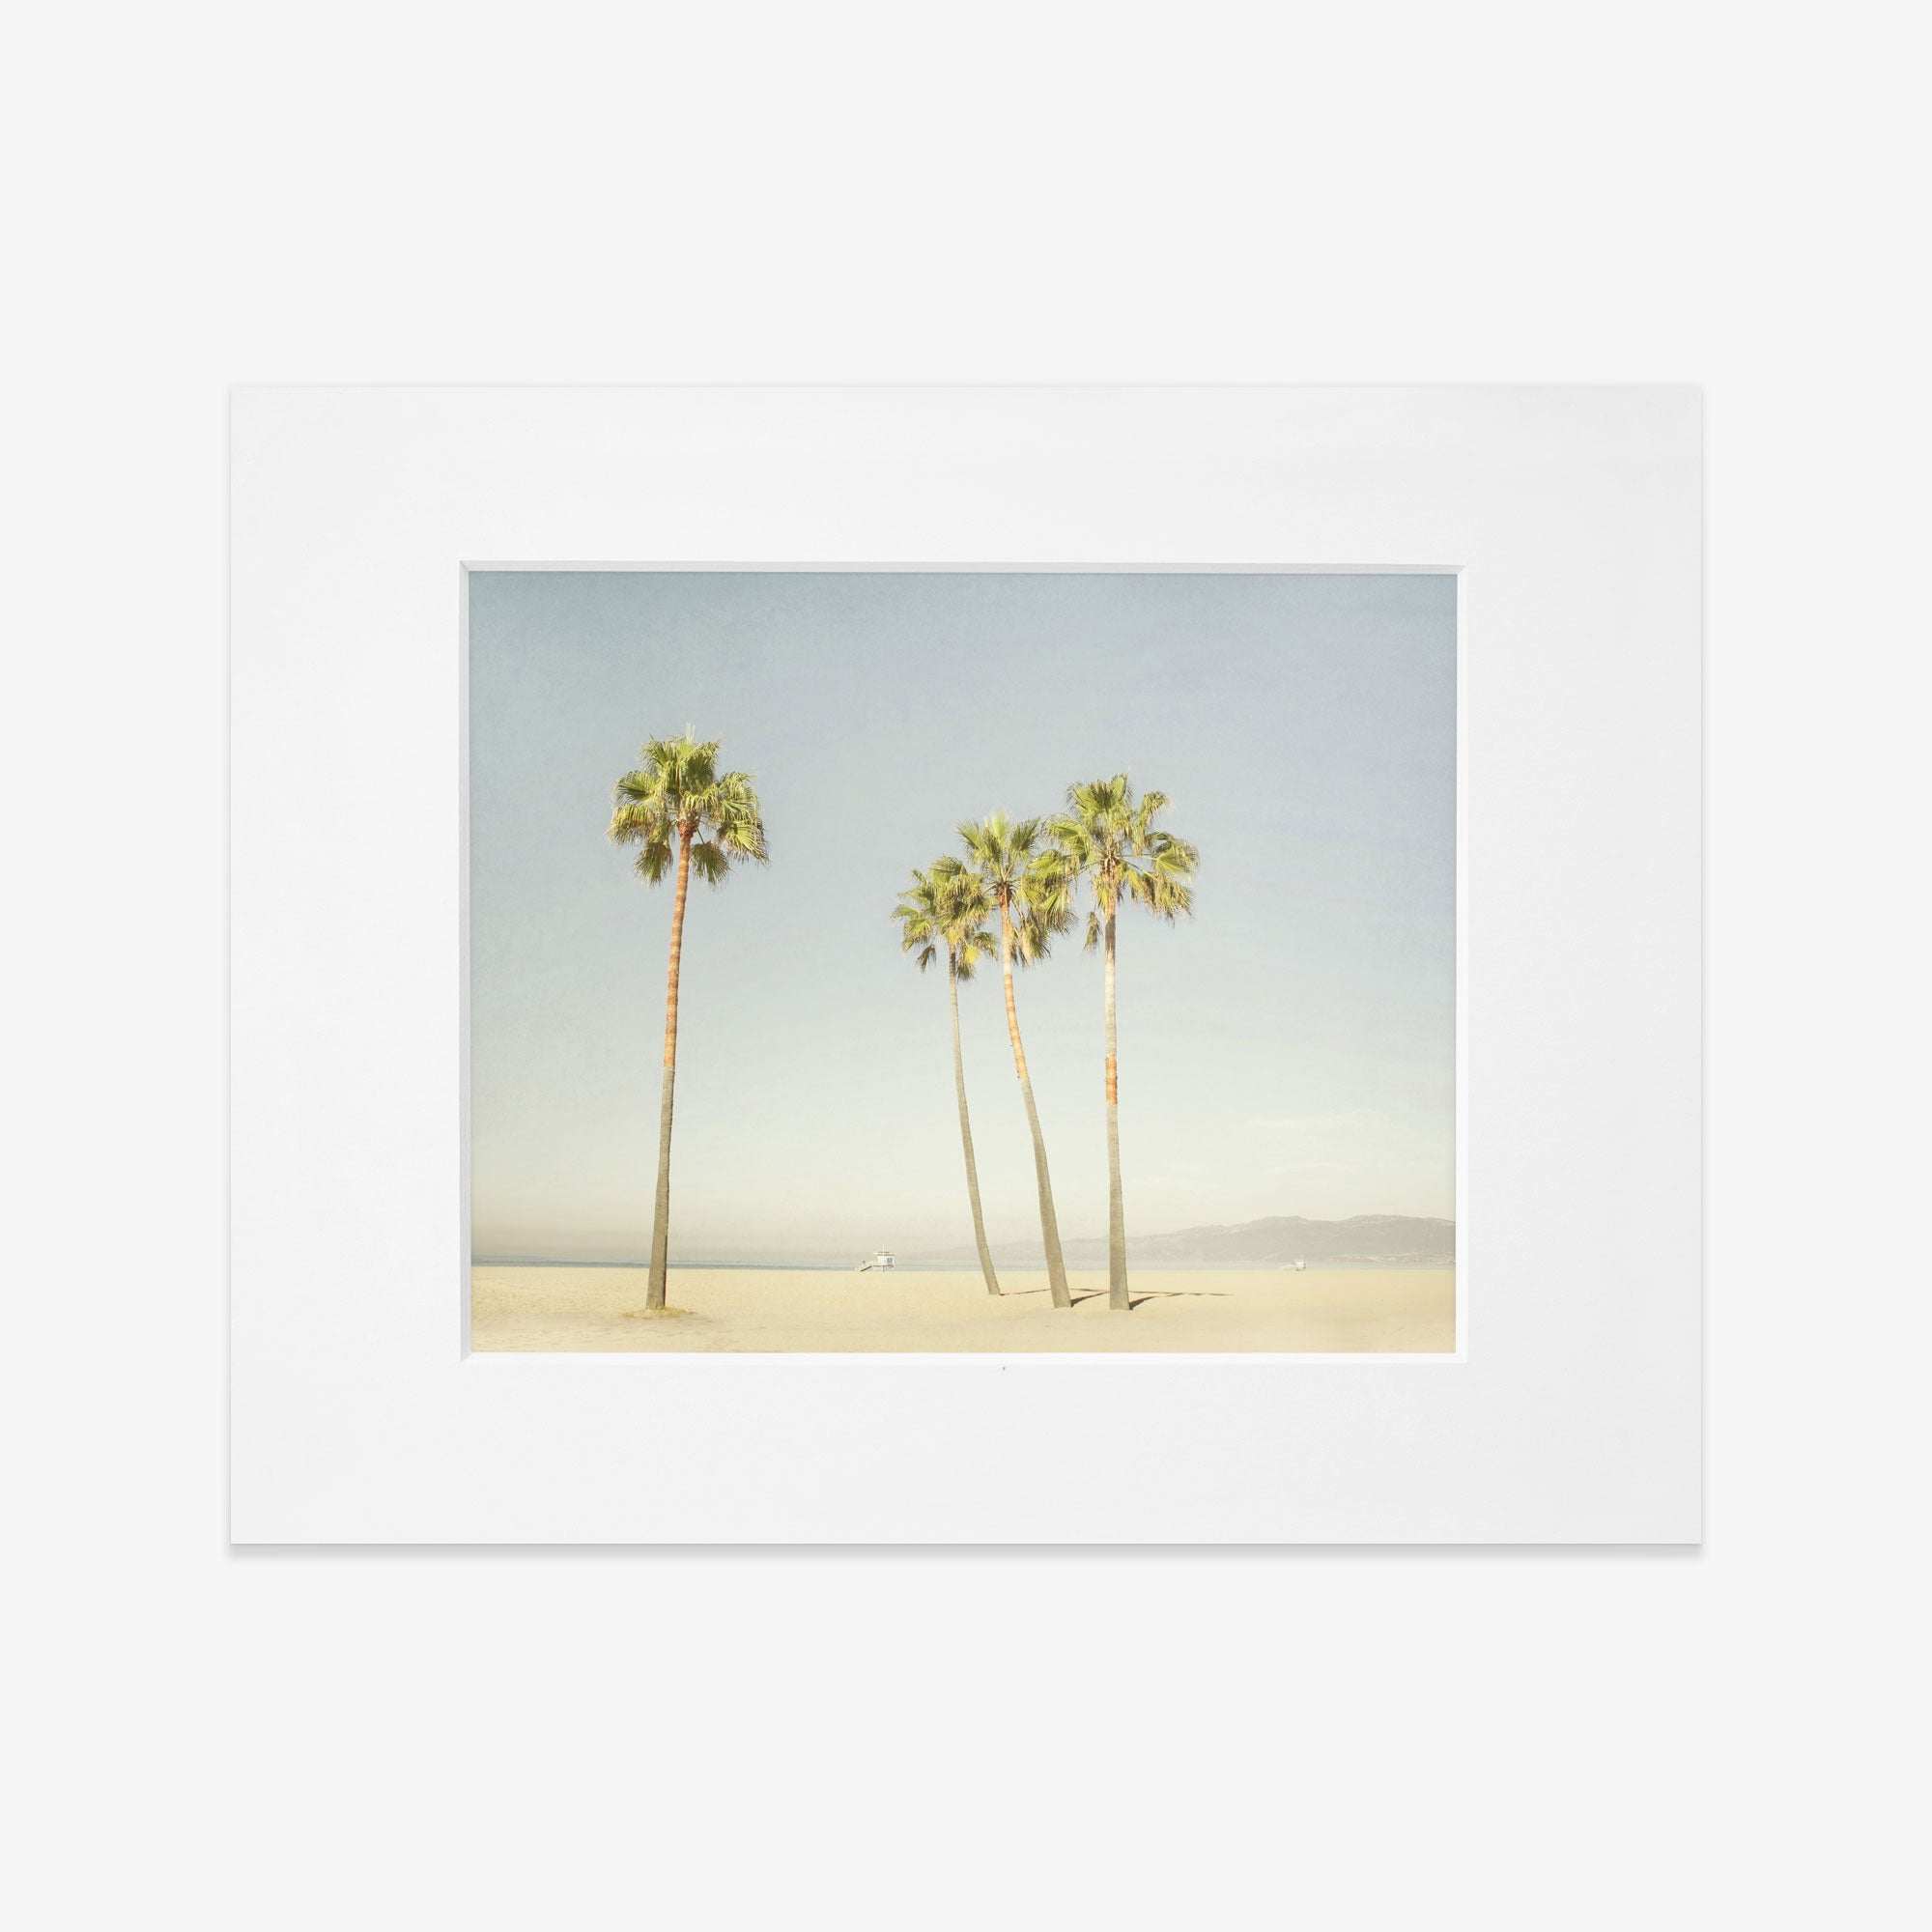 A framed photograph of four tall palm trees on Venice Beach under a clear sky. The image has a vintage, sun-bleached look, adding a nostalgic feel. The product name is California Venice Beach Print, &#39;Boardwalk Palms&#39; by Offley Green.